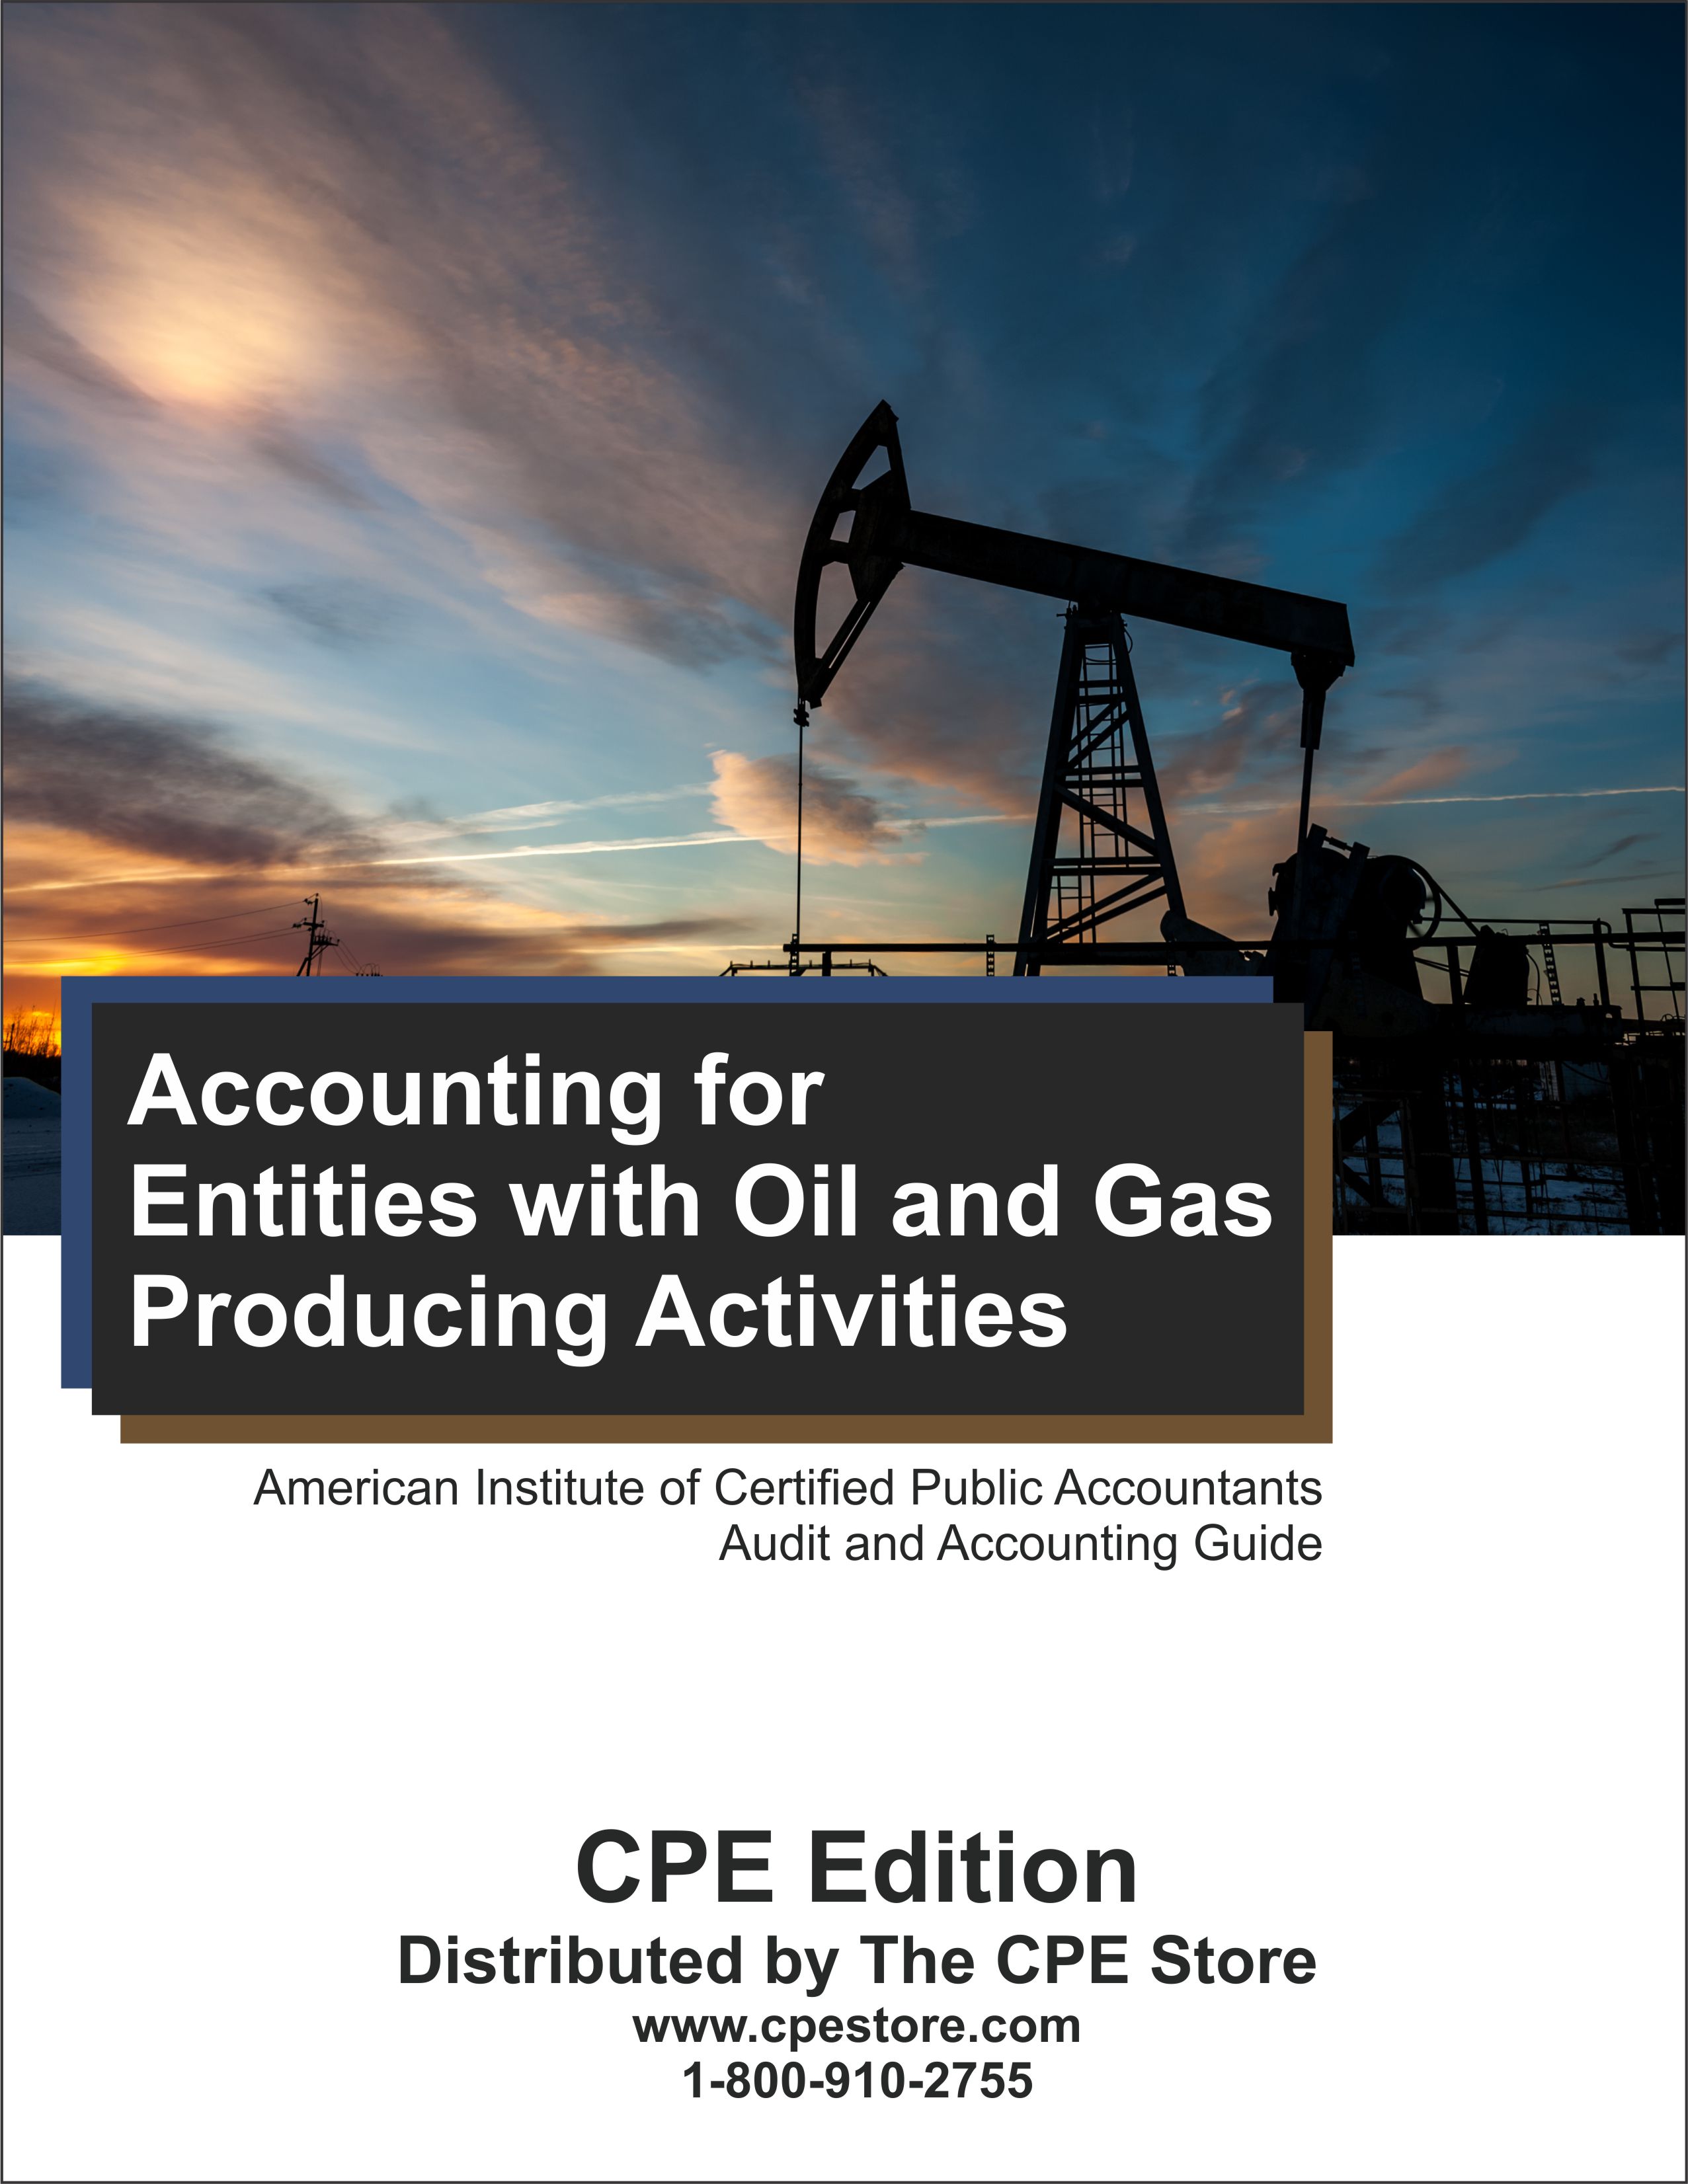 Accounting for Entities with Oil and Gas Producing Activities